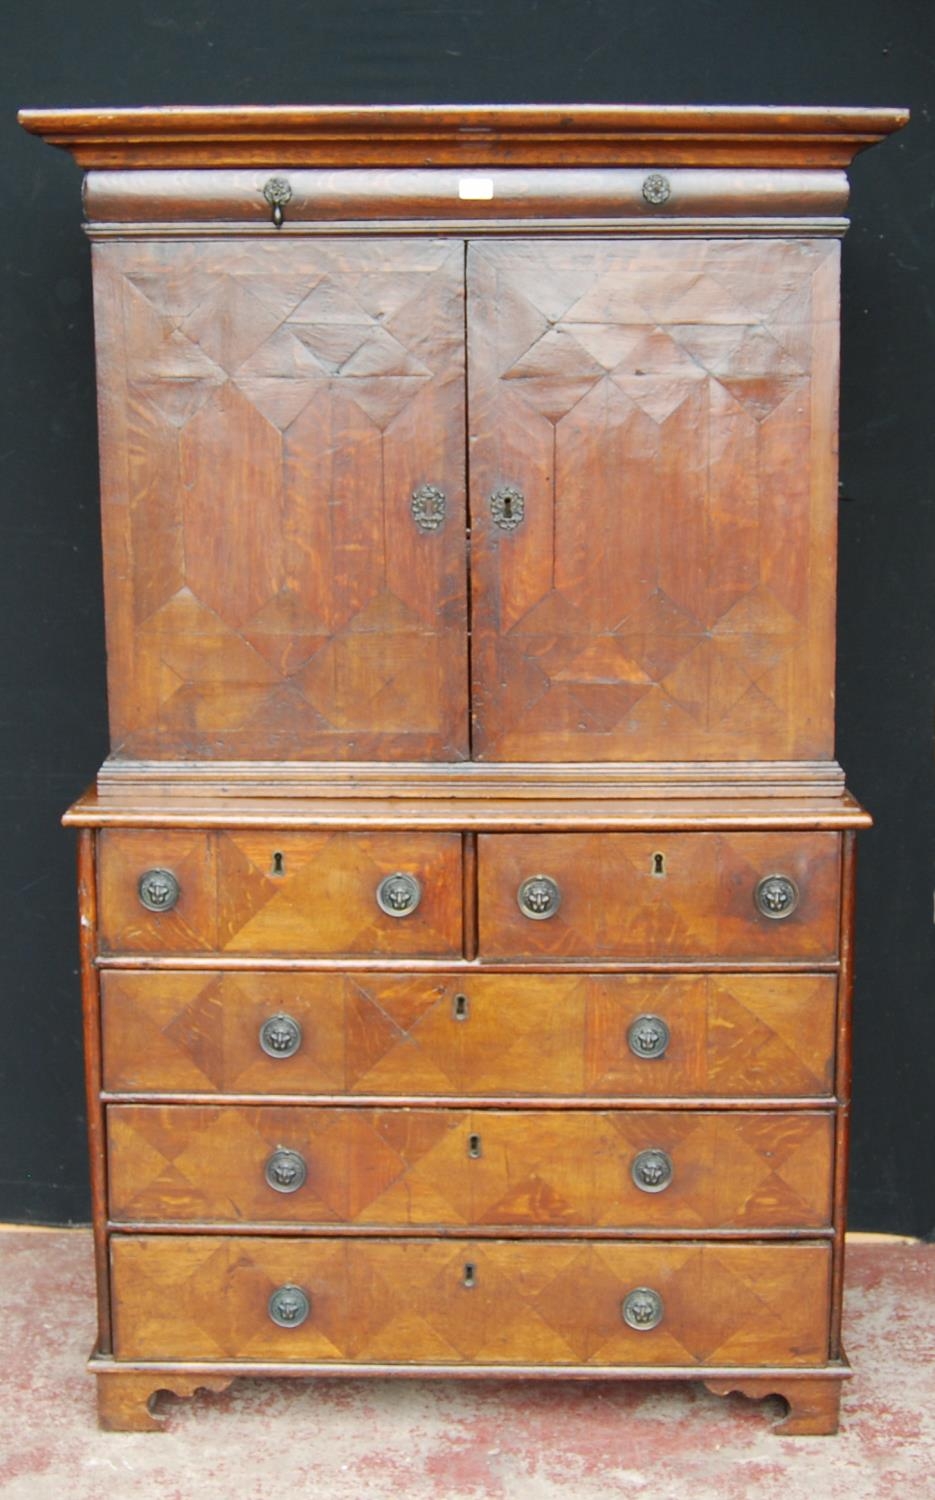 Early 18th century Queen Anne walnut cabinet on chest, the cabinet top with a long drawer above